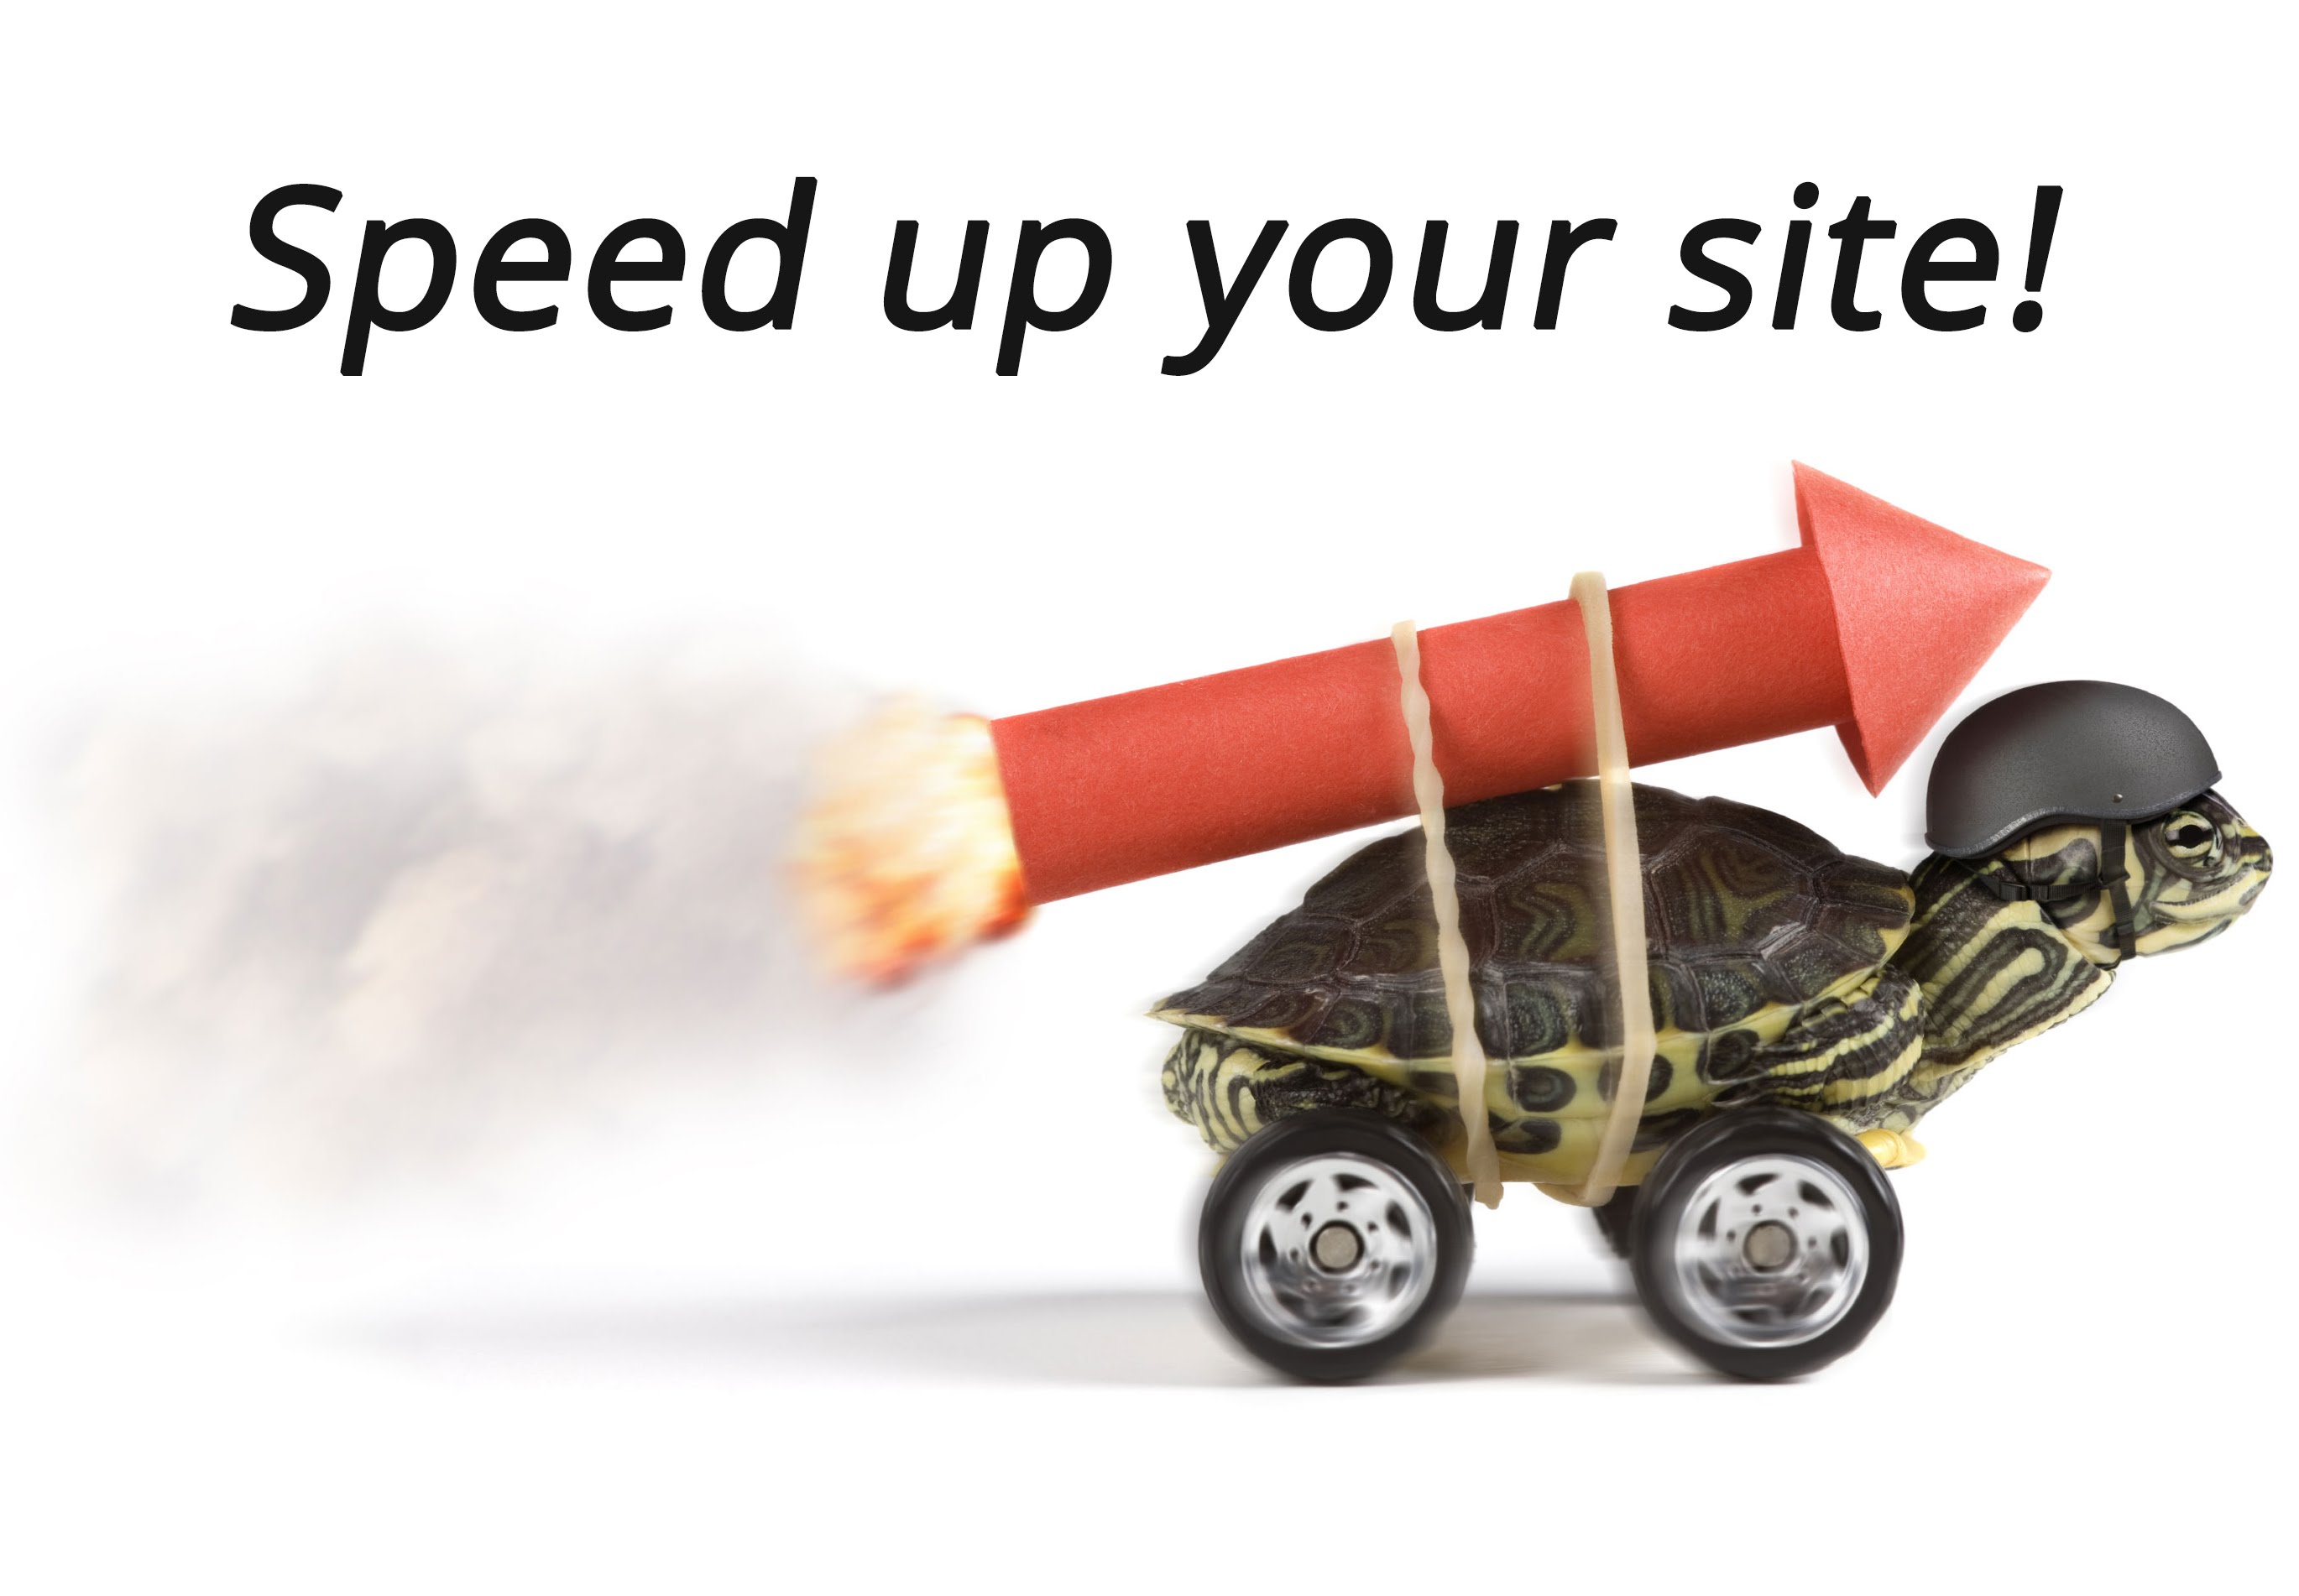 Speed up your site rocket and turtle